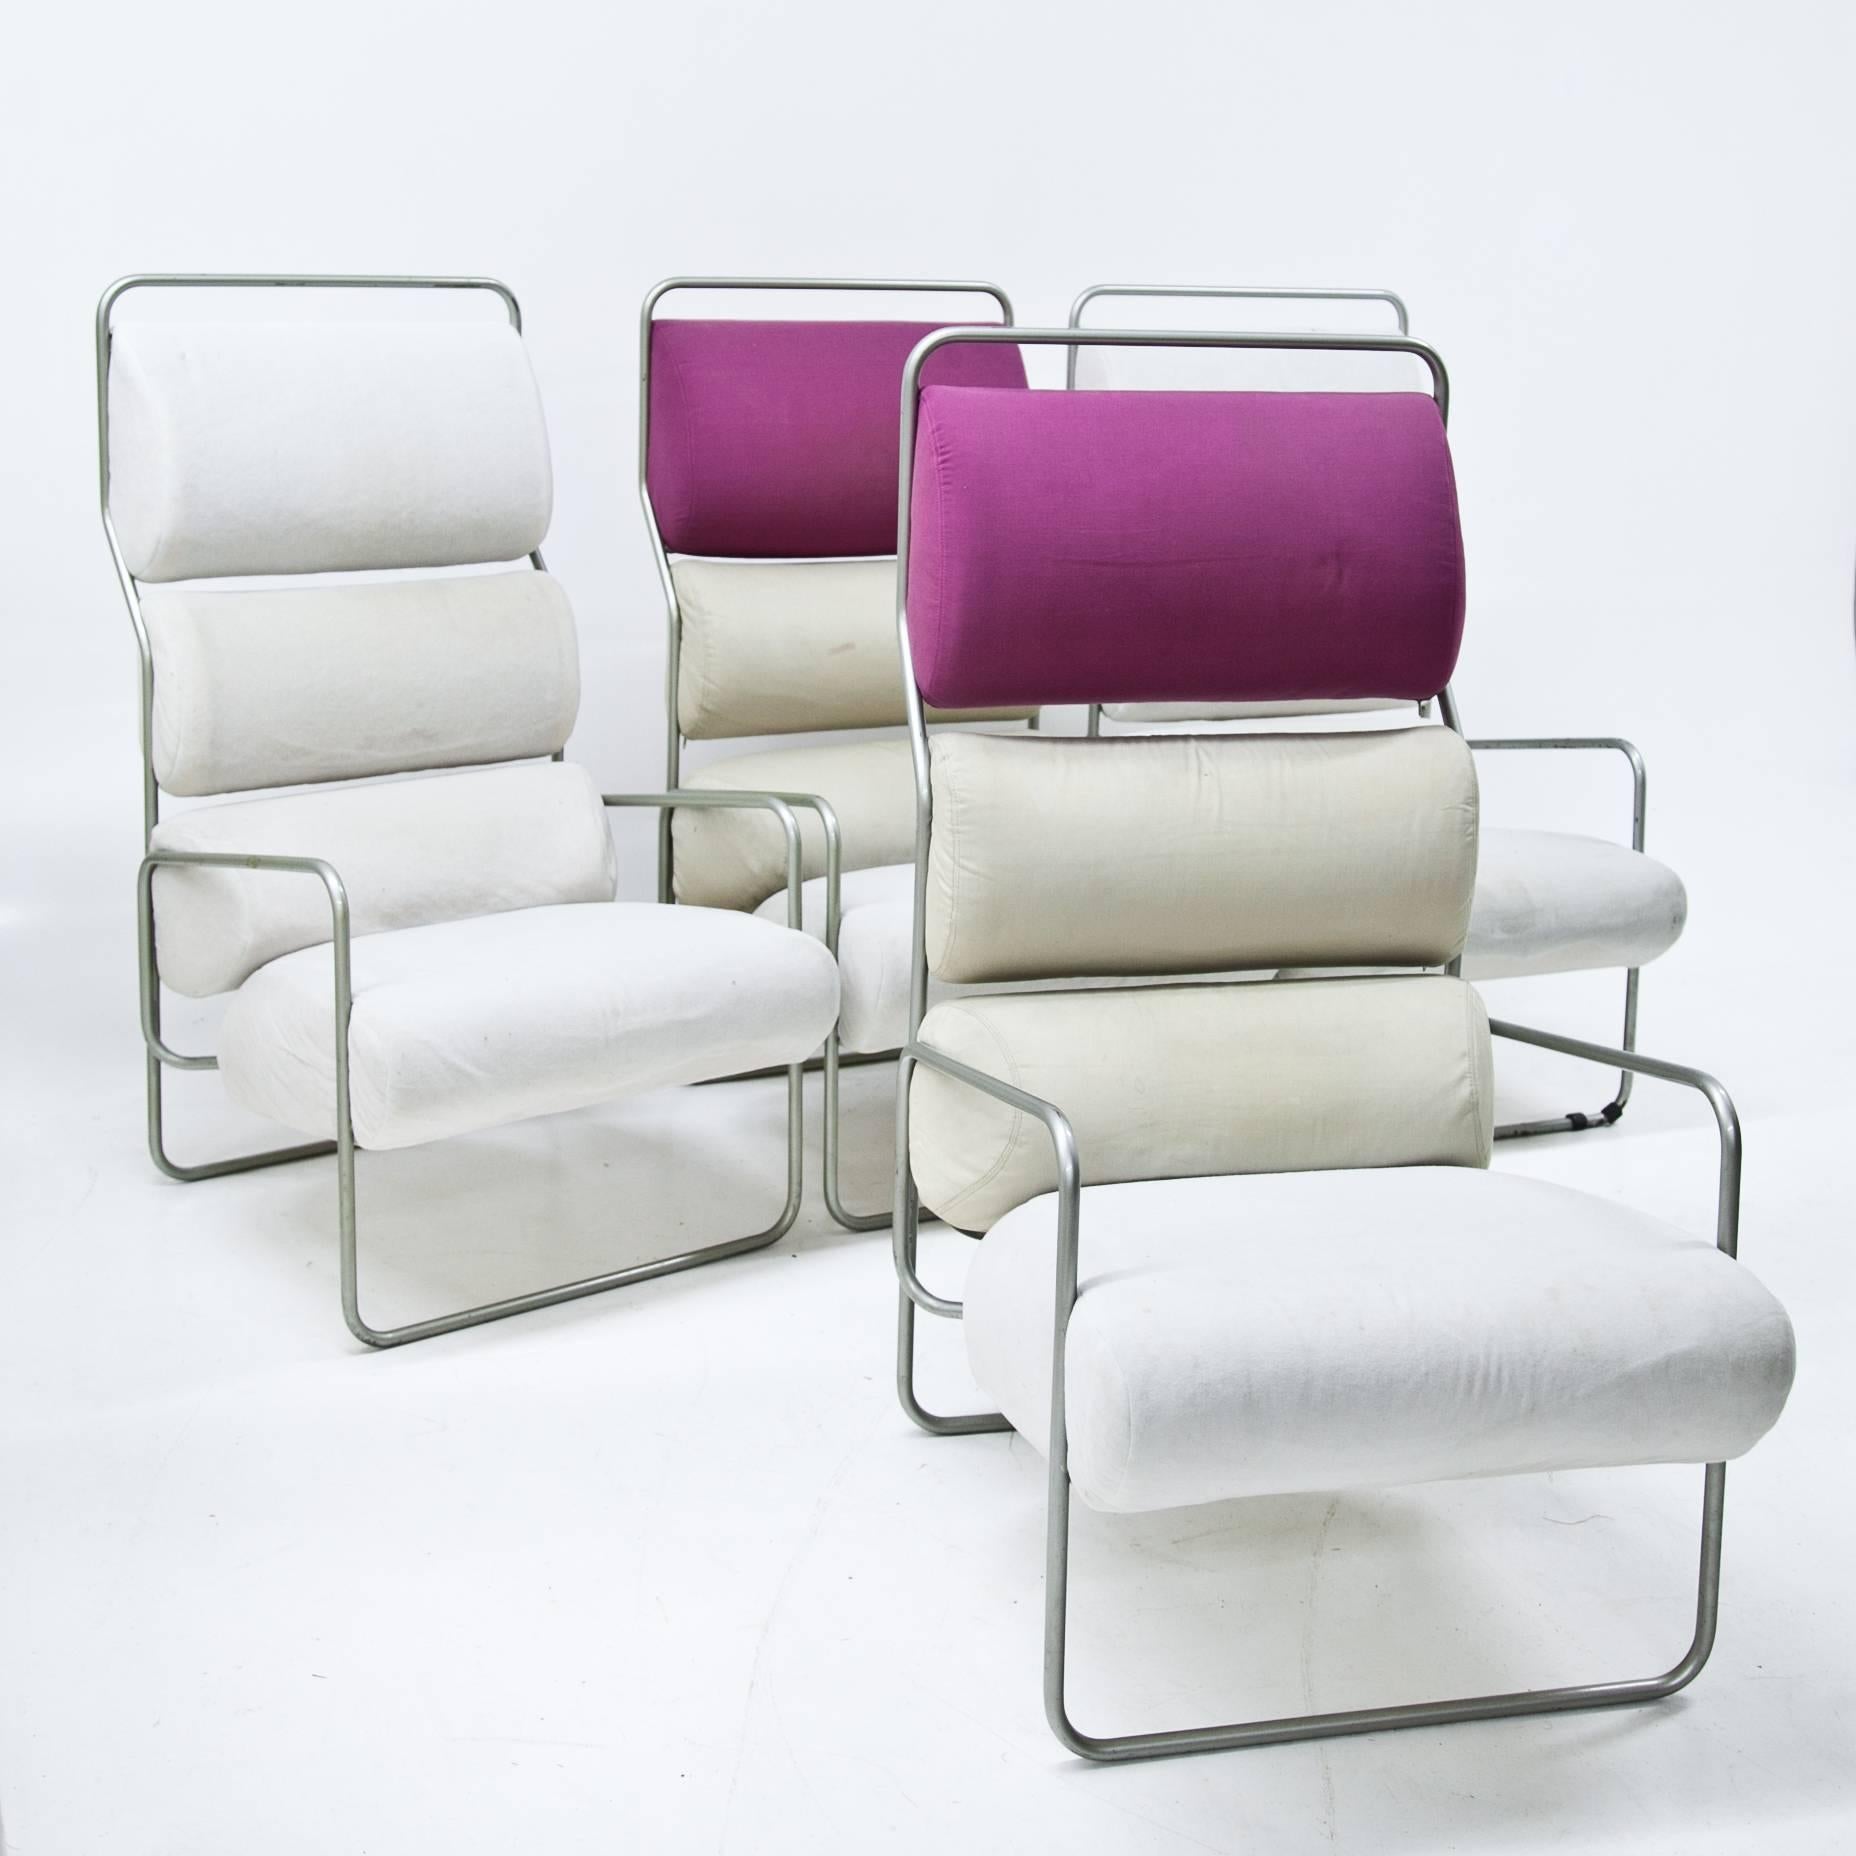 Italian Lounge Chairs by Achille Castiglioni for Driade, Italy, Mid-20th Century